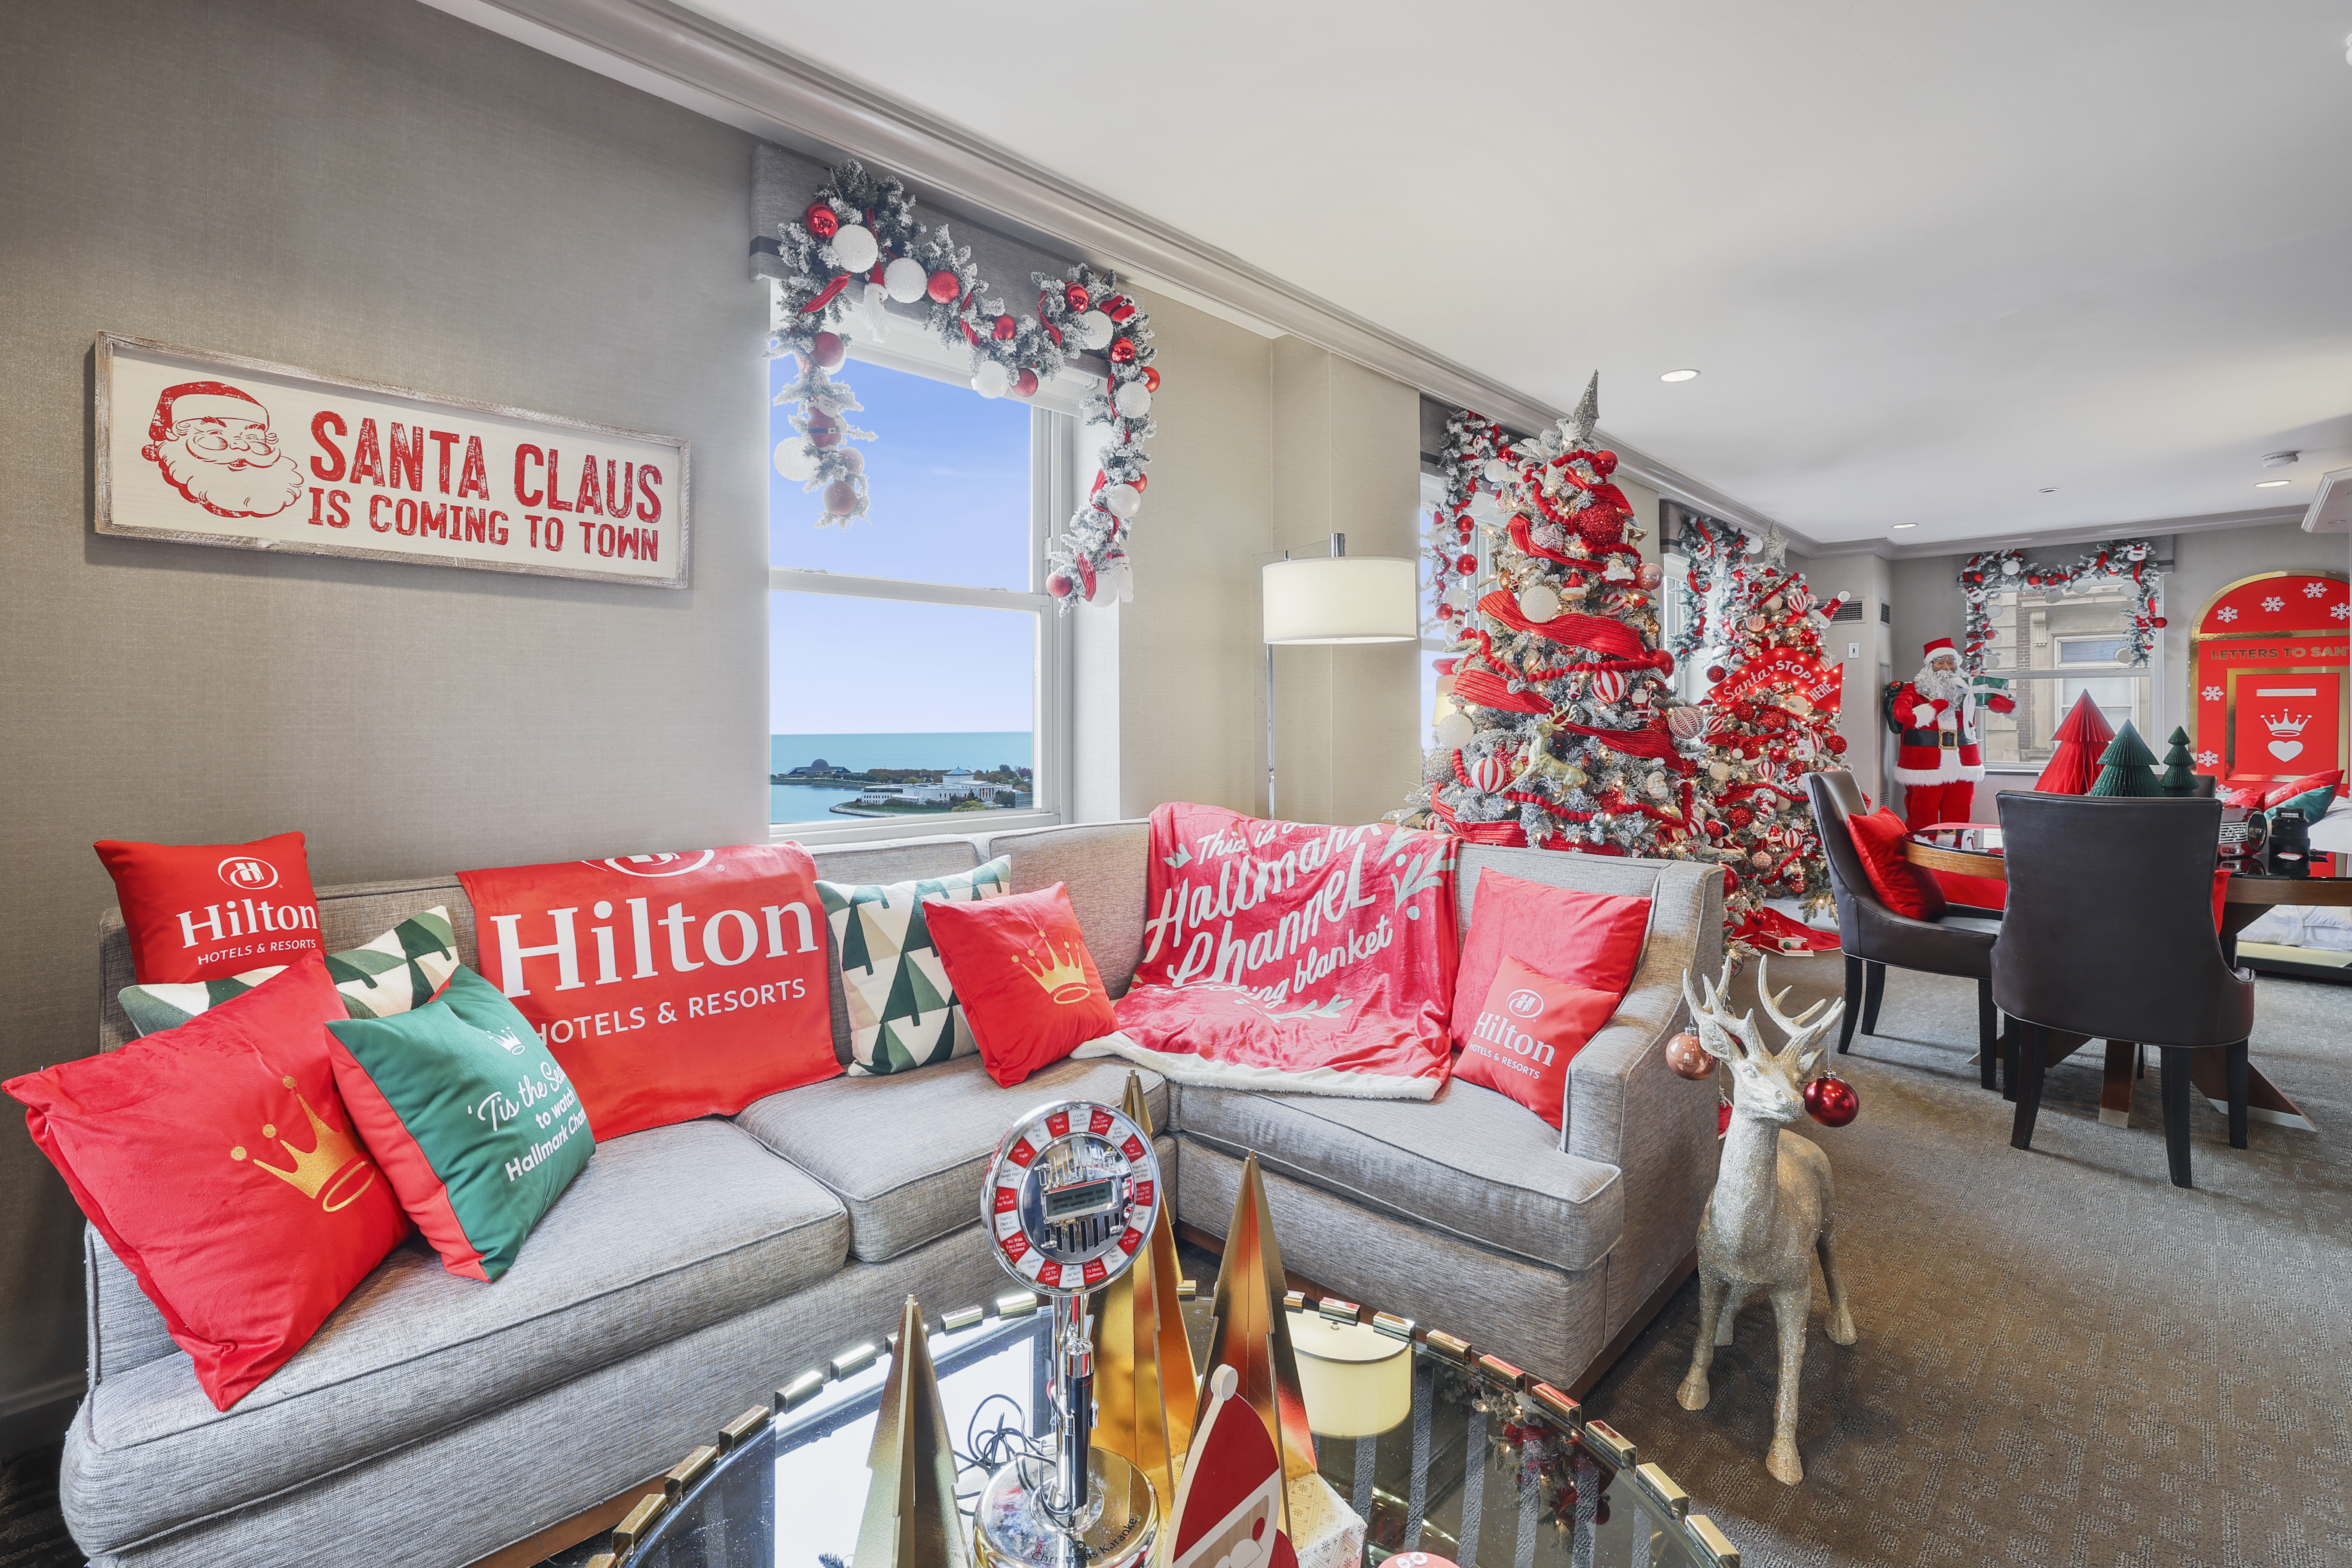 Hilton and Hallmark Channel - Santa Summit Suite at Hilton Chicago - Seating and Decor